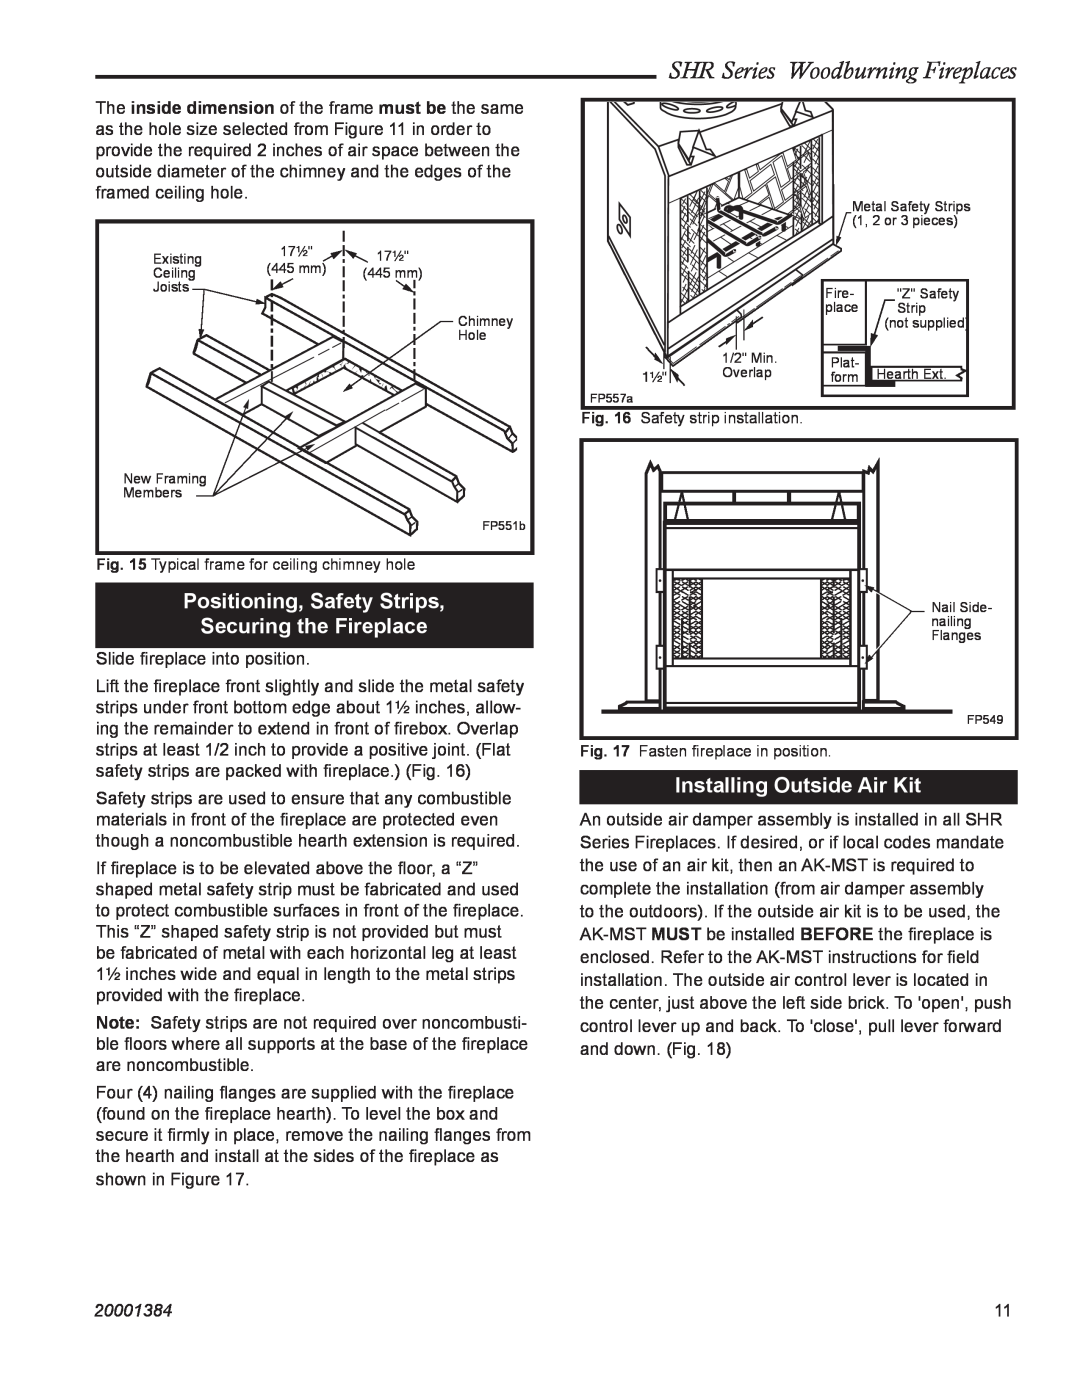 Vermont Casting SHR36, SHR52, SHR48 Positioning, Safety Strips Securing the Fireplace, Installing Outside Air Kit, 20001384 